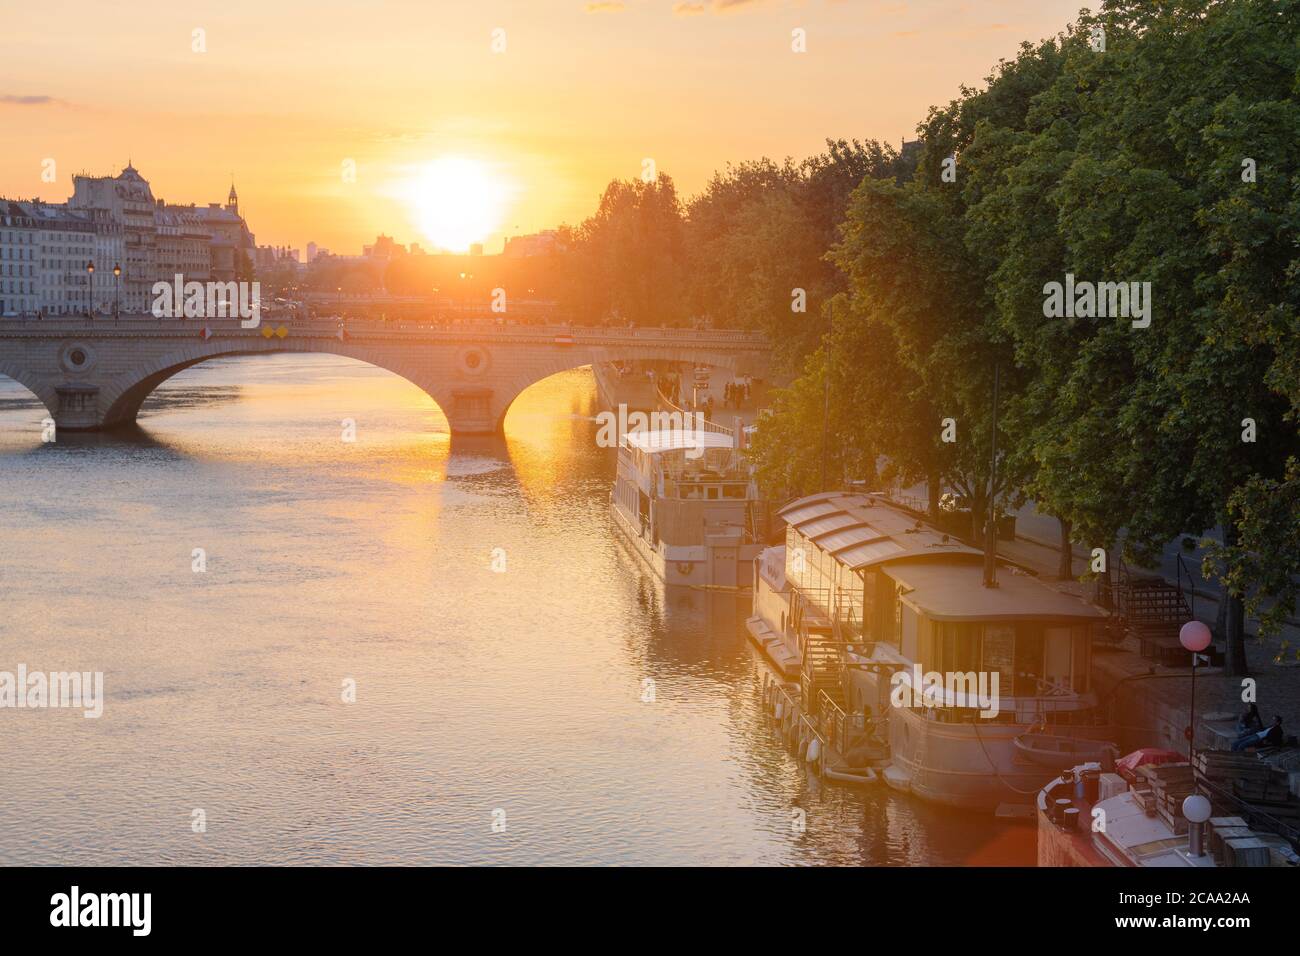 PARIS, FRANCE -Sunset over the seine river. Paris is one of the most popular tourist destinations in Europe. Stock Photo